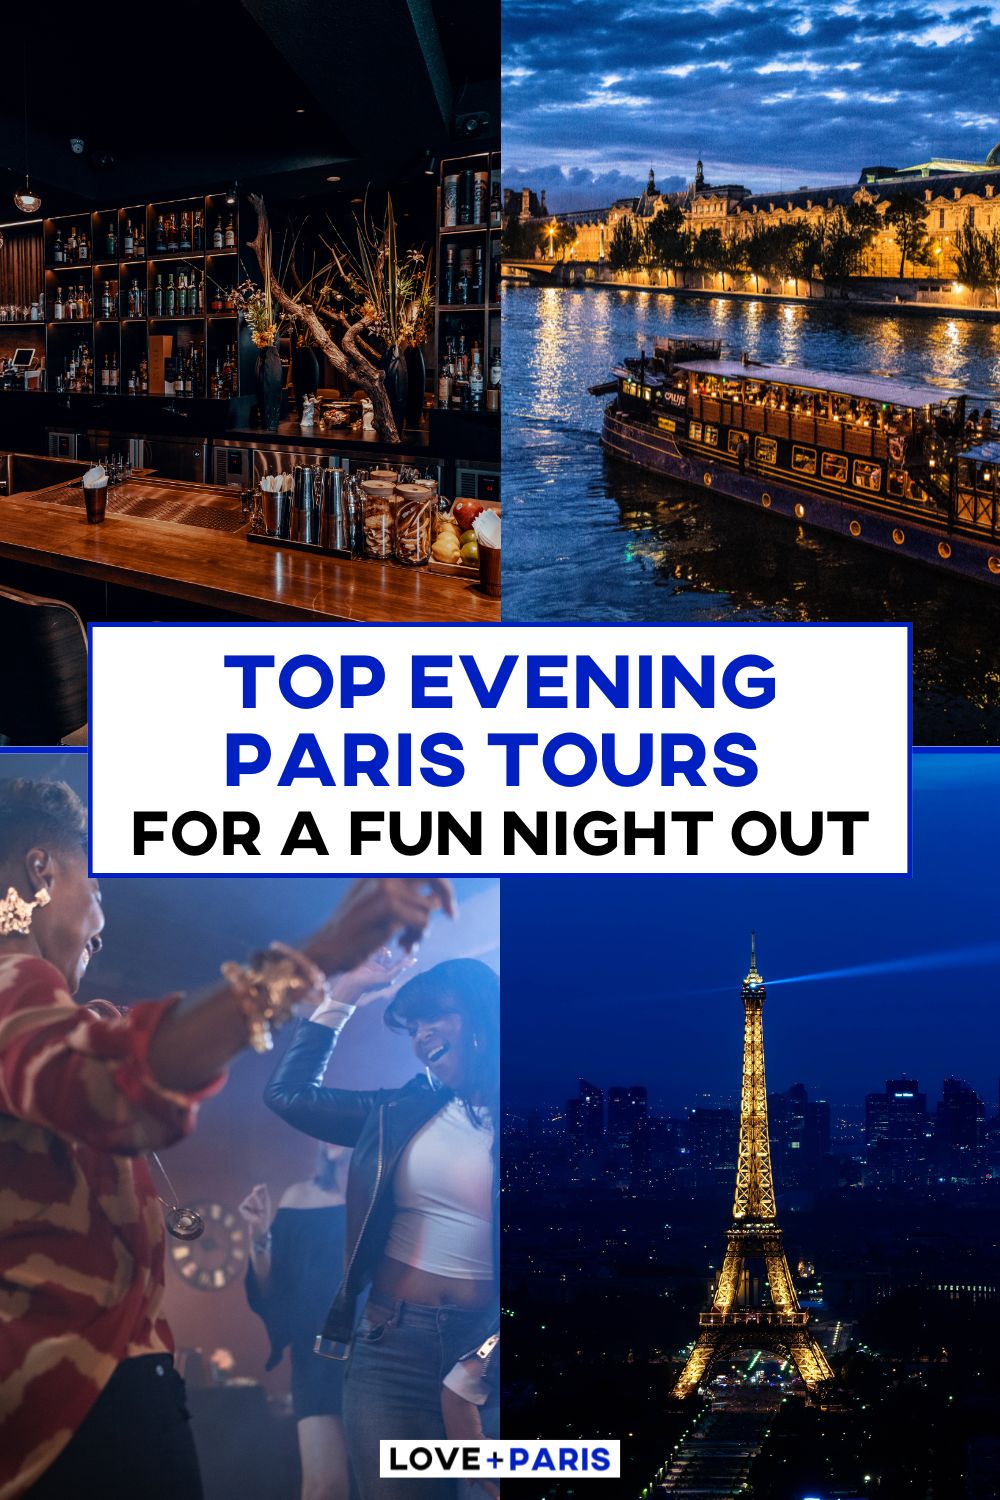 This is an image of a Pinterest pin detailing Top Evening Tours In Paris For A Fun Night Out